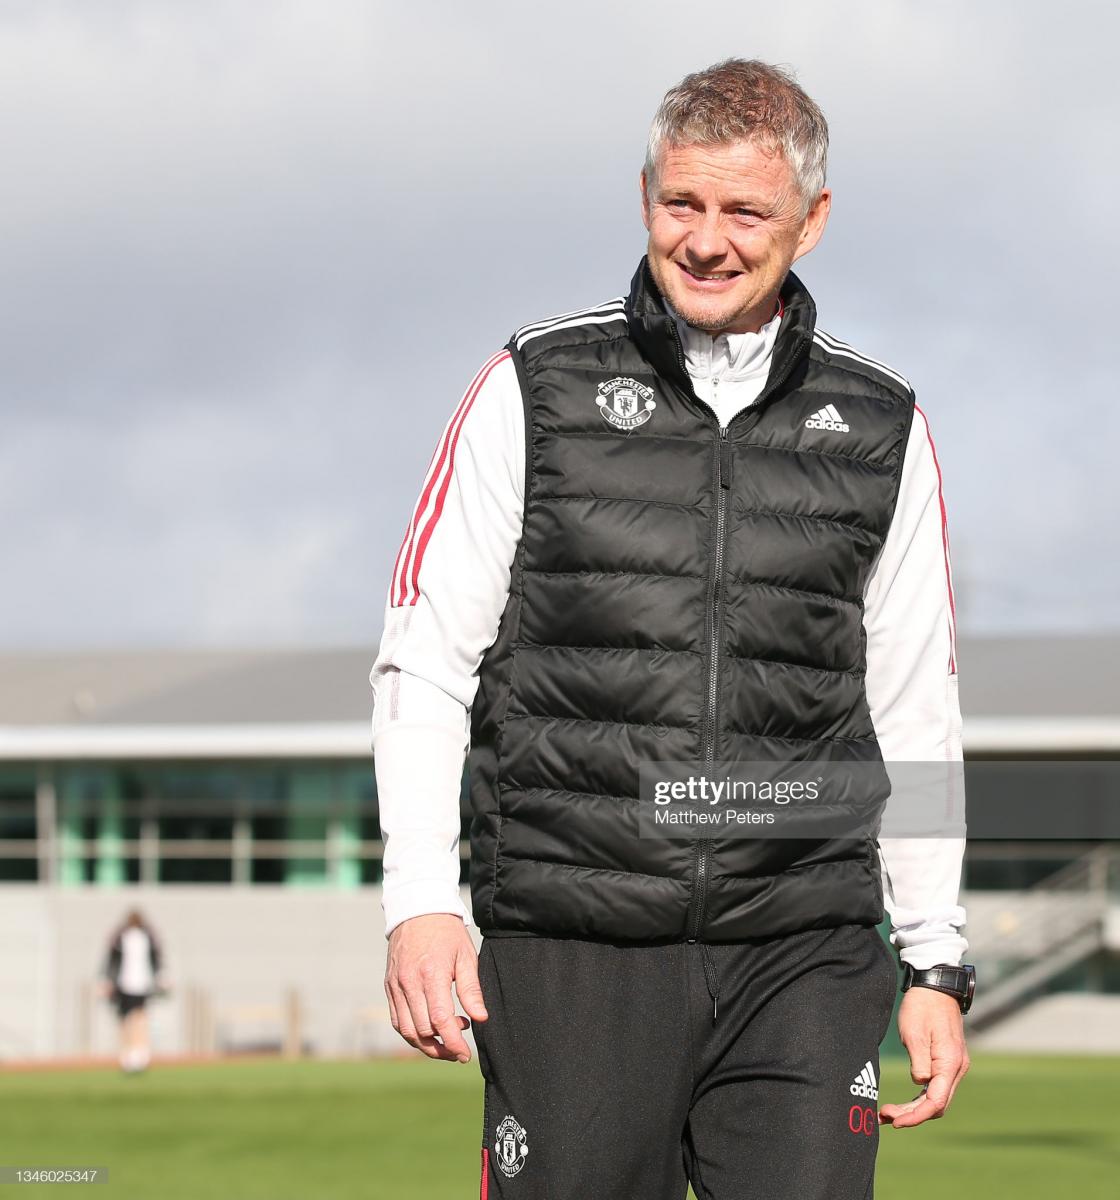 Ole Gunnar Solskjaer takes a training sesson: GettyImages